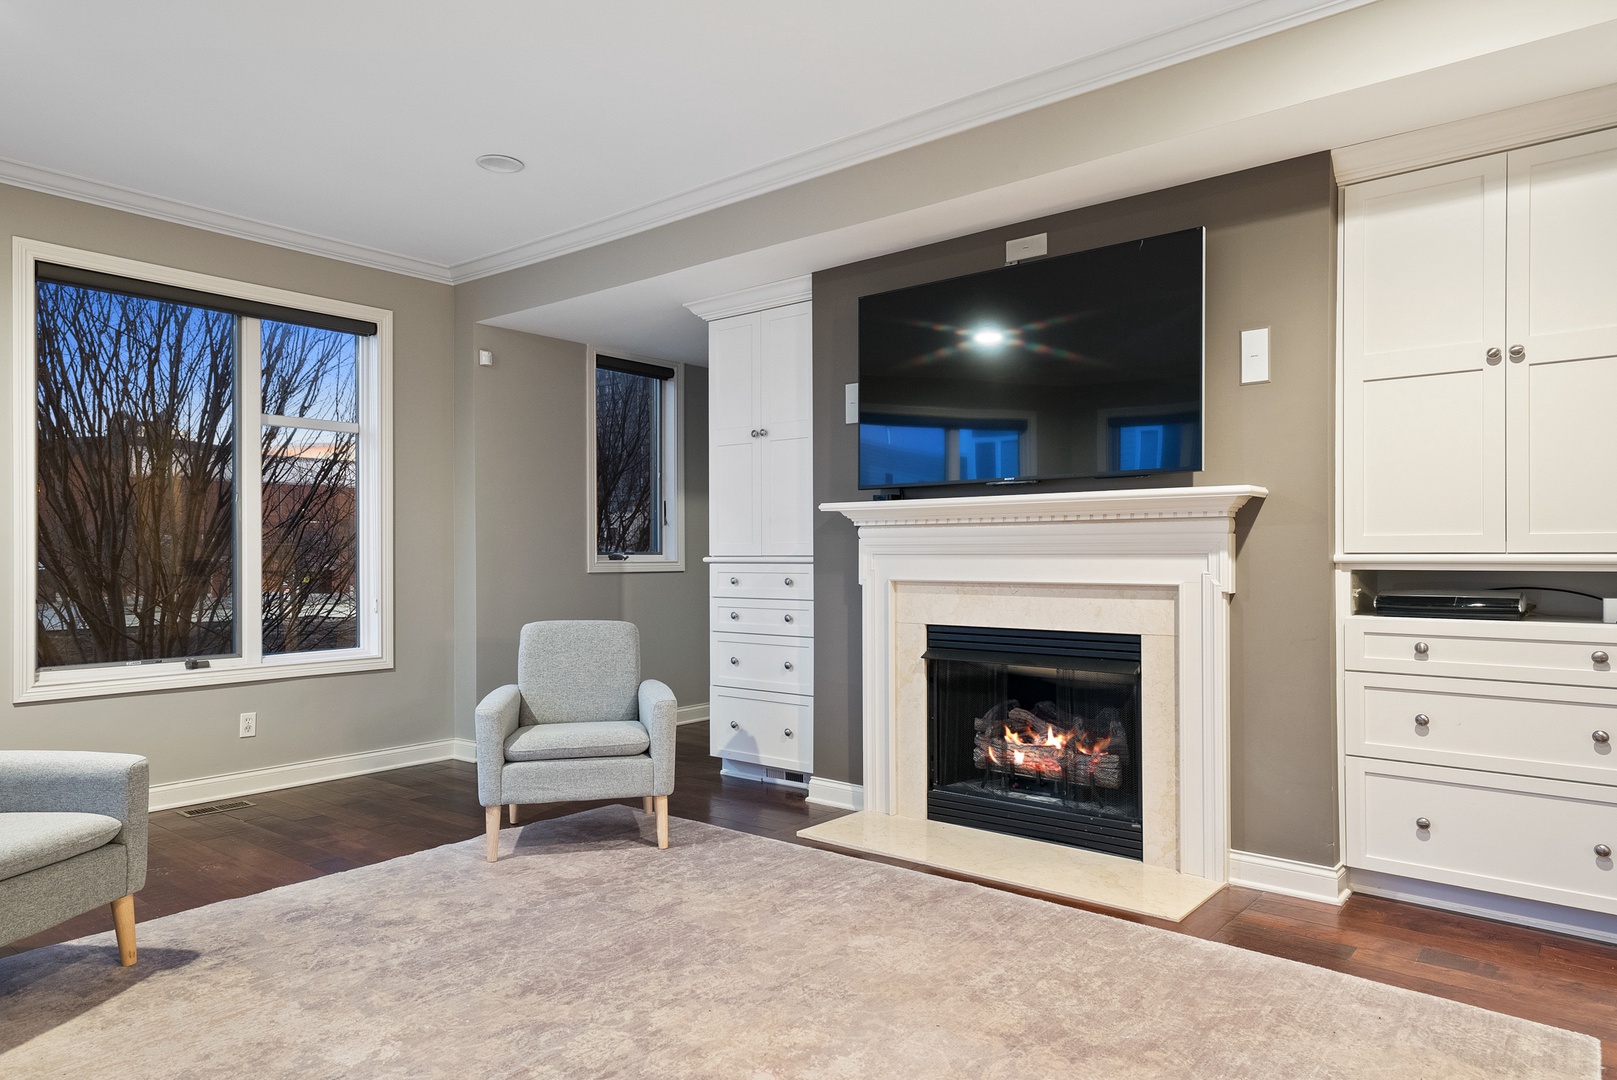 Fire Place Downtown Cleveland Luxury Rental Home